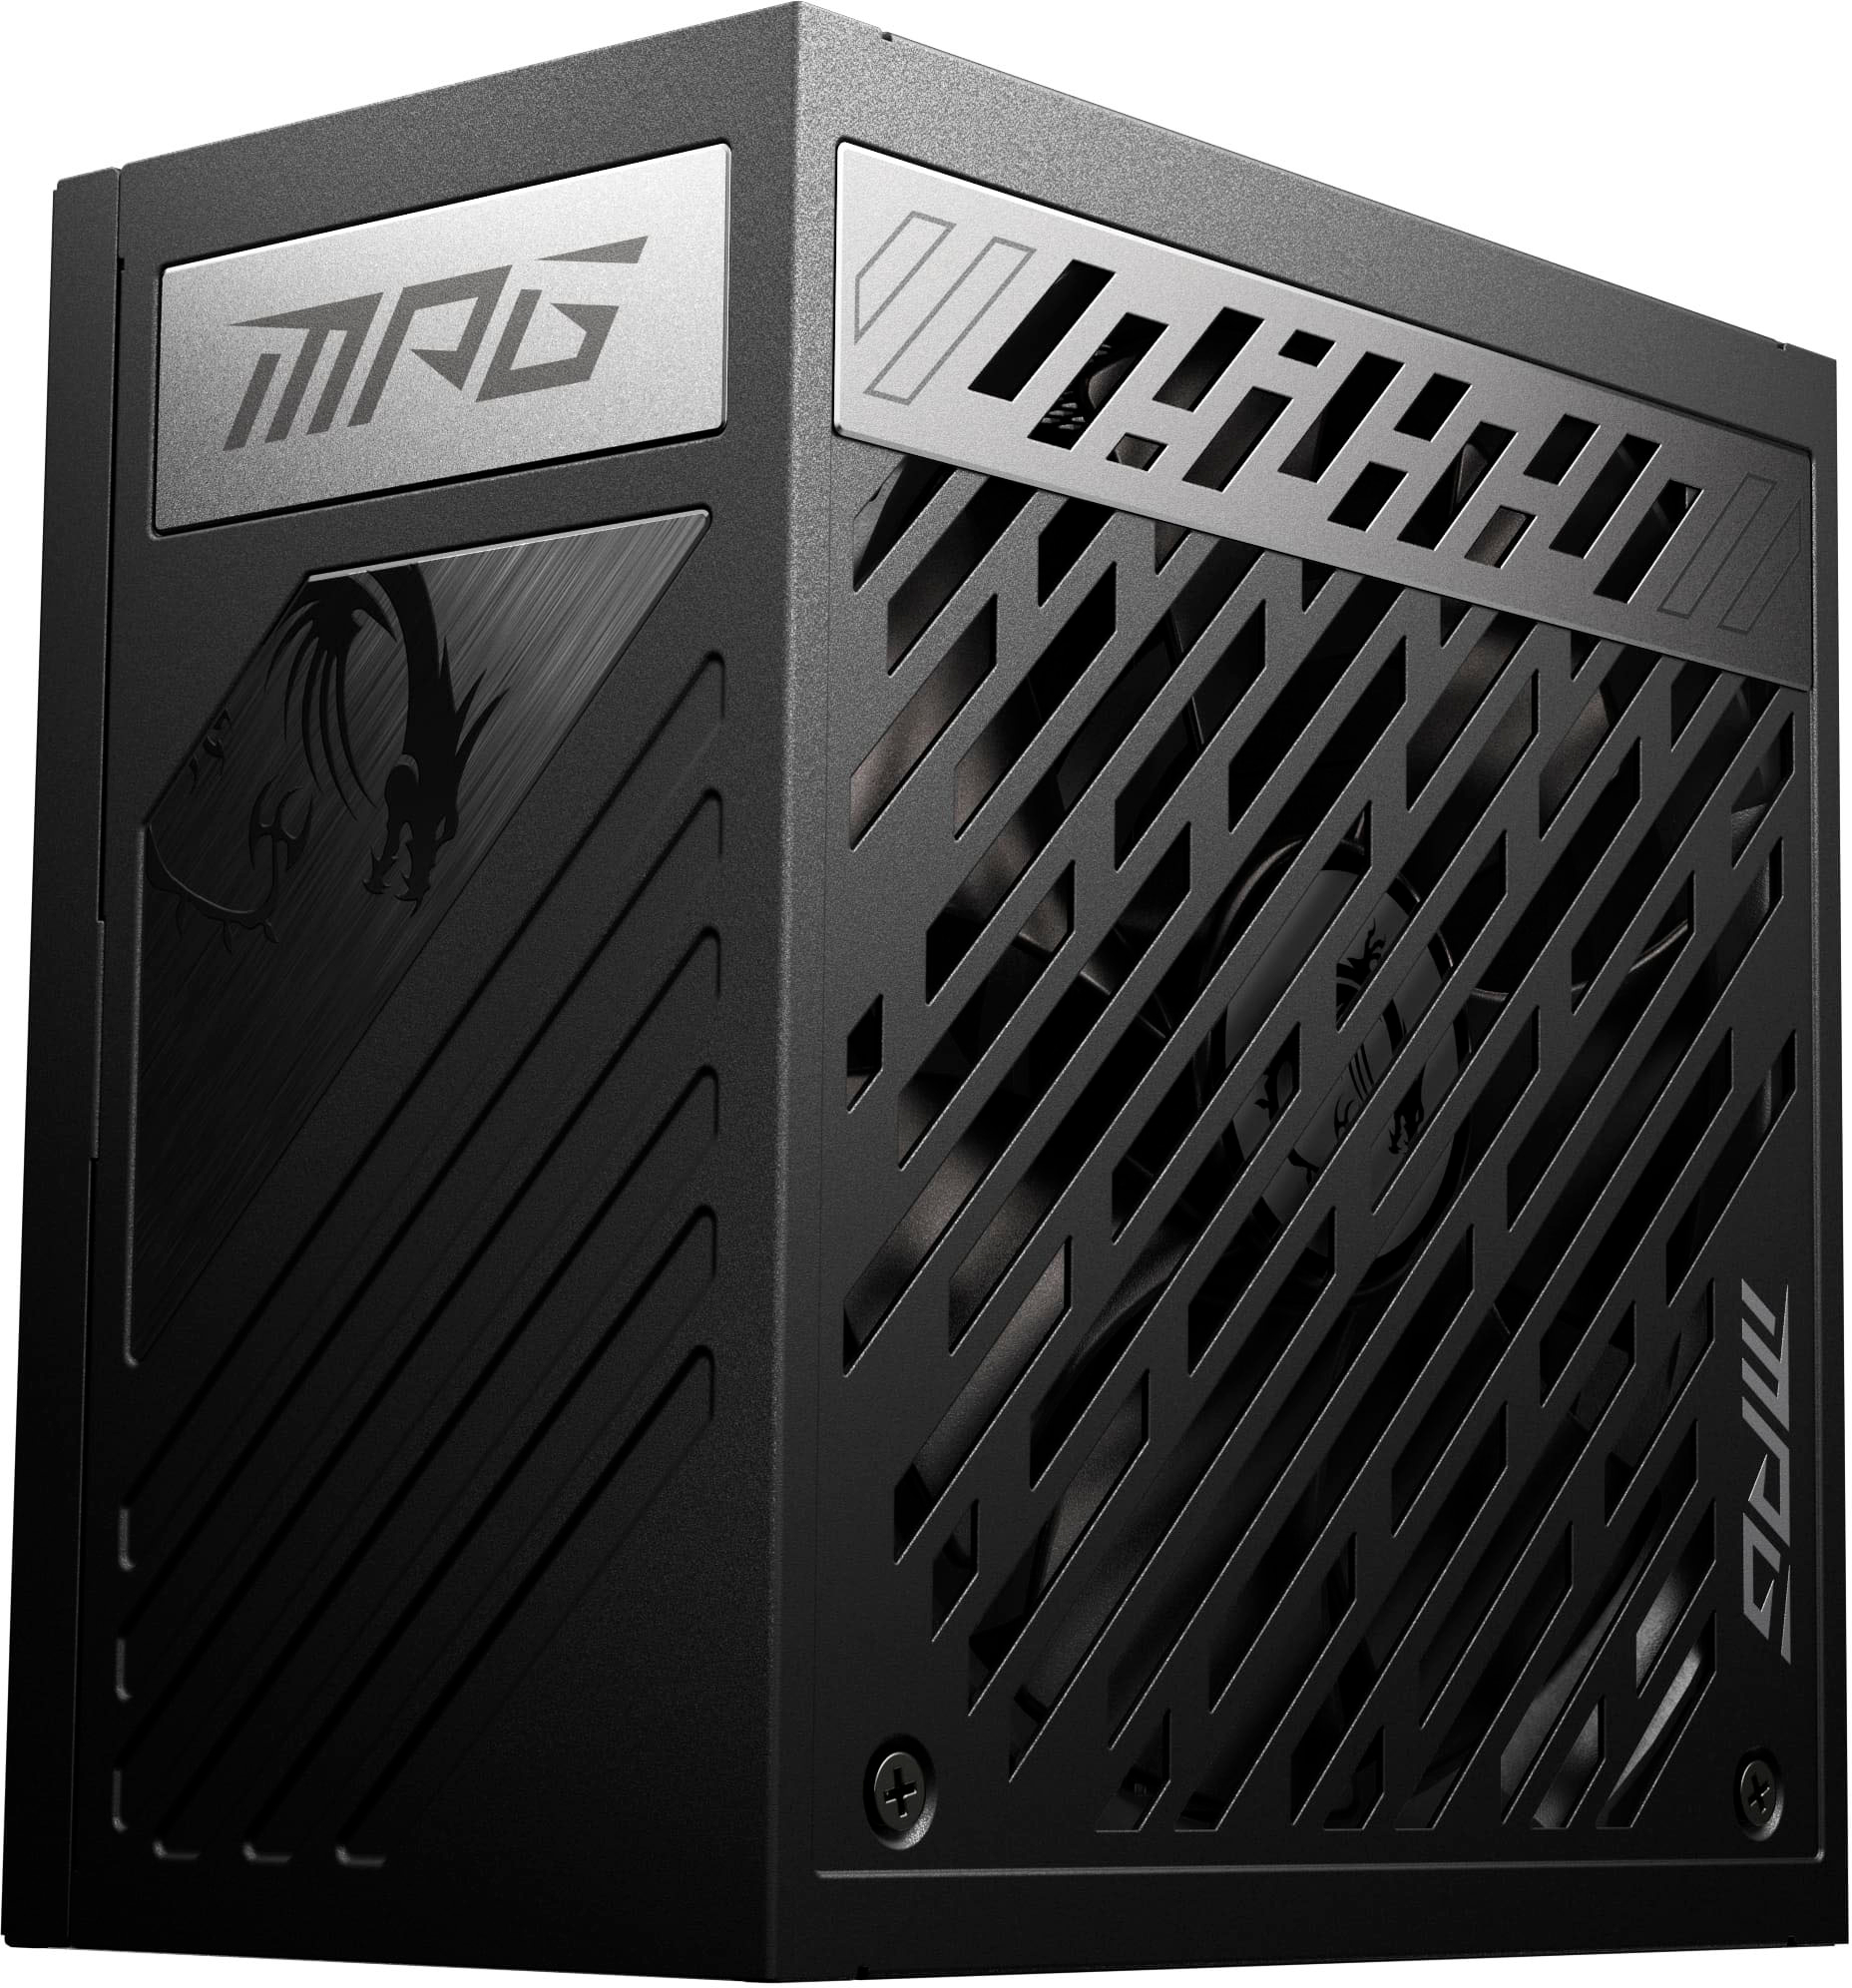 MSI 850W GOLD F/MODULAR MPG A850G PCIE5  Andromeda PC Gaming Maximum Power: 850W 20+4-pin Main:1 8-pin EPS:2 6+2-pin PCI-E:6 16-pin PCI-E:1 SATA  Connector(s):8 Peripheral Connector(s):4 Floppy Connector(s):1 PFC:Active  AC Input:100-240VAC Over Voltage